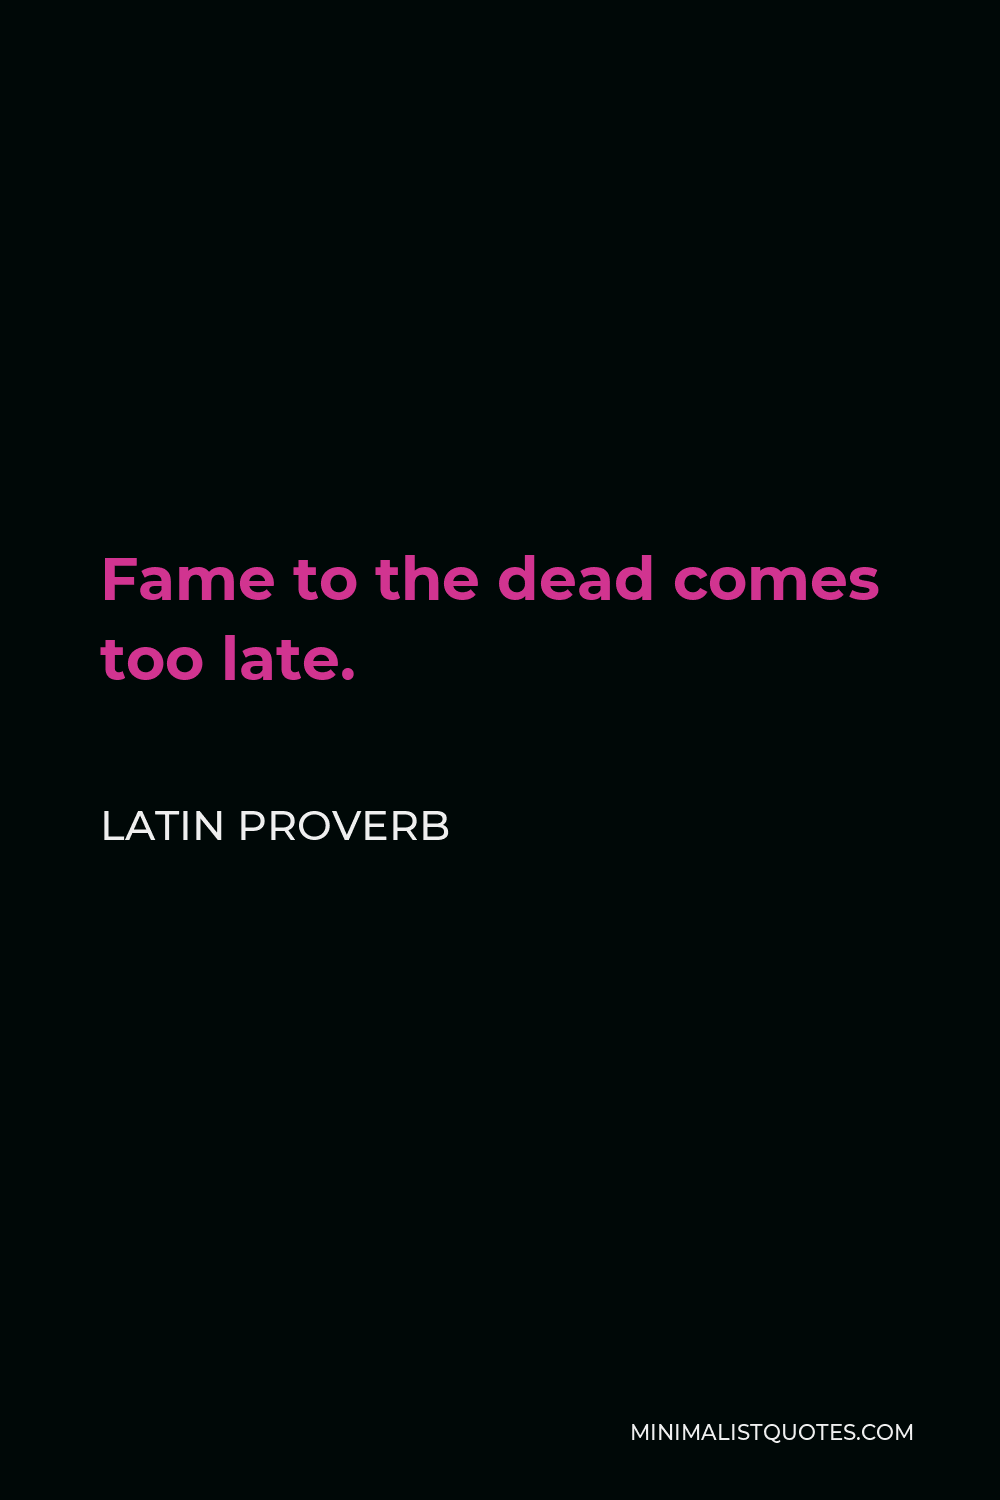 Latin Proverb Quote - Fame to the dead comes too late.